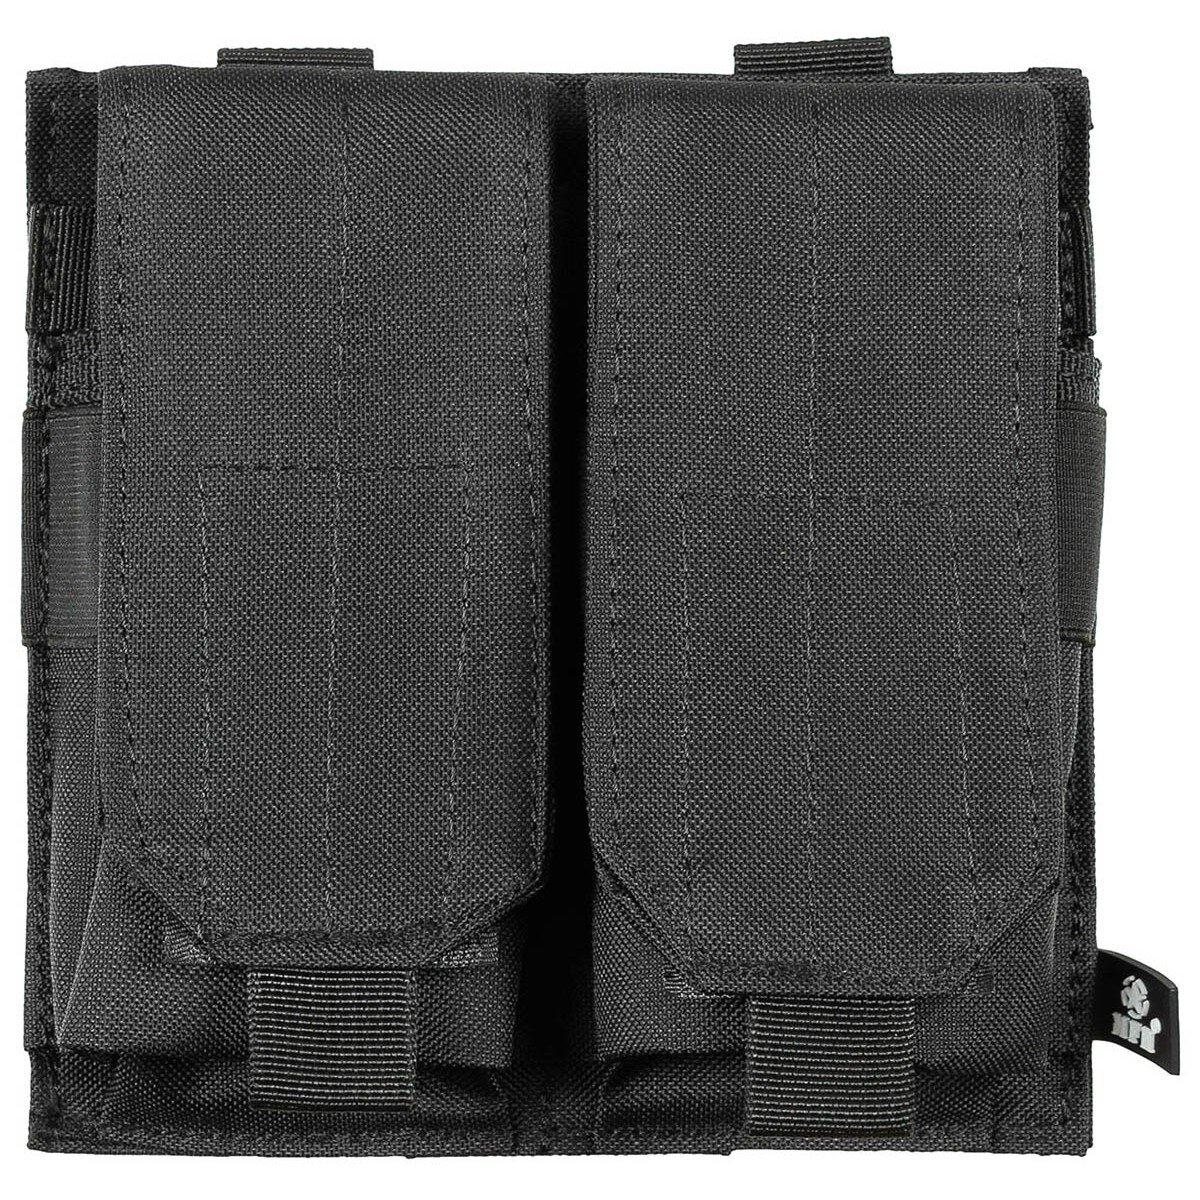 Ammo Pouch, double, "MOLLE", black